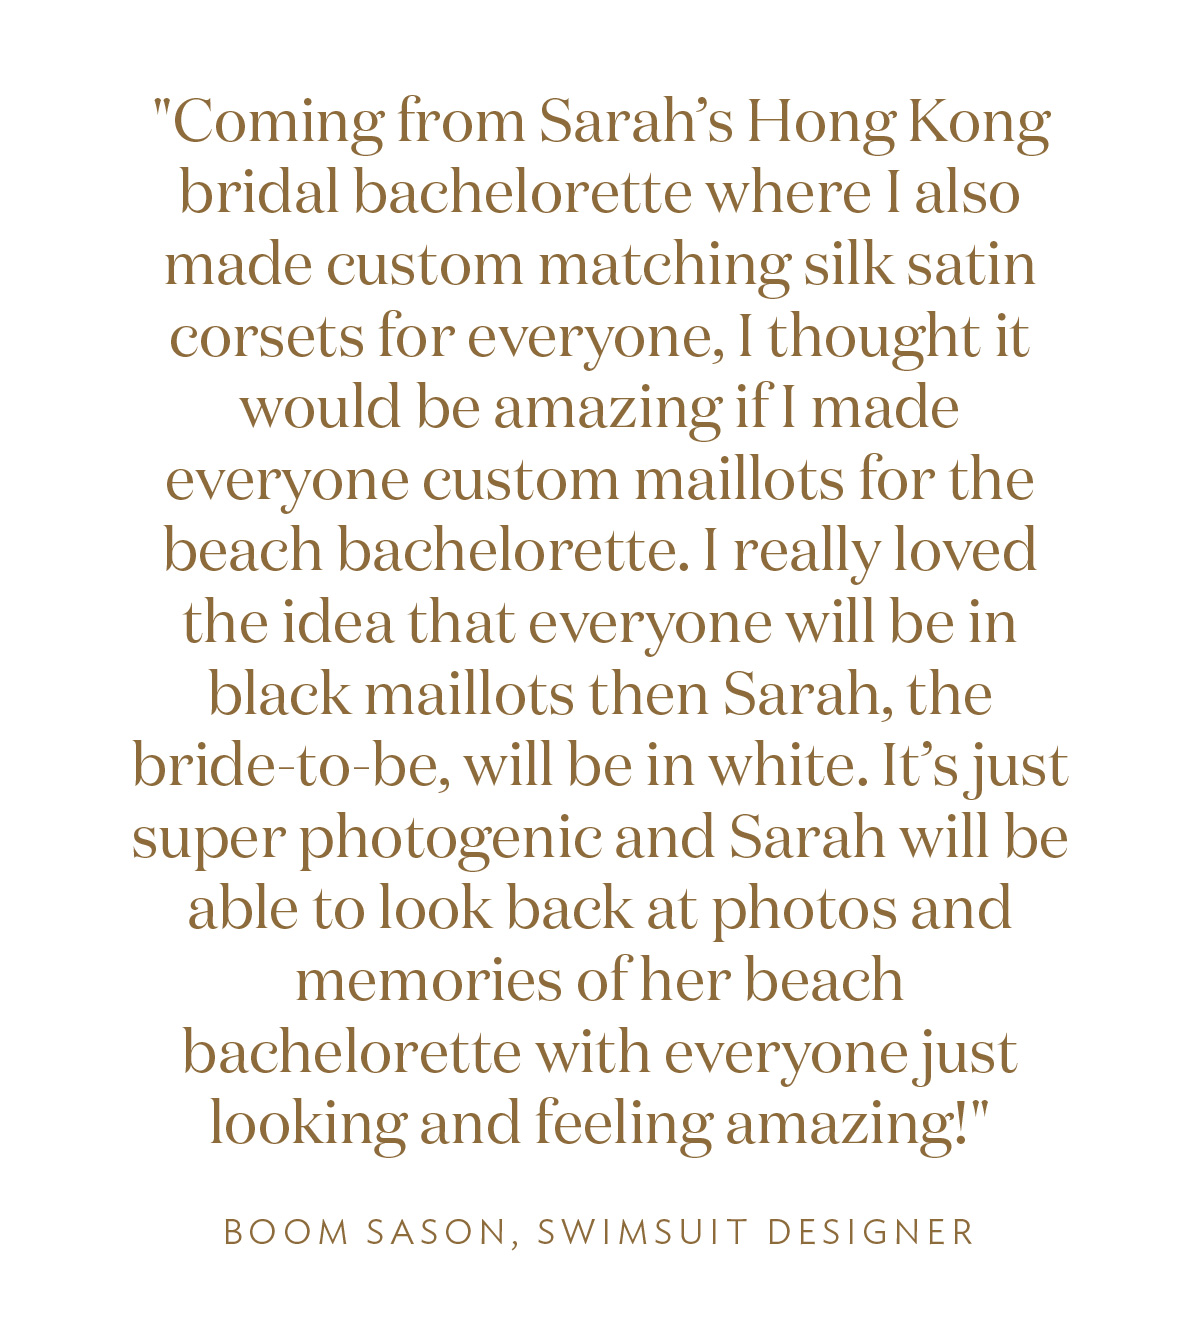 Coming from Sarah’s Hong Kong bridal bachelorette where I also made custom matching silk satin corsets for everyone, I thought it would be amazing if I made everyone custom maillots for the beach bachelorette. I really loved the idea that everyone will be in black maillots then Sarah, the bride-to-be, will be in white. It’s just super photogenic and Sarah will be able to look back at photos and memories of her beach bachelorette with everyone just looking and feeling amazing!